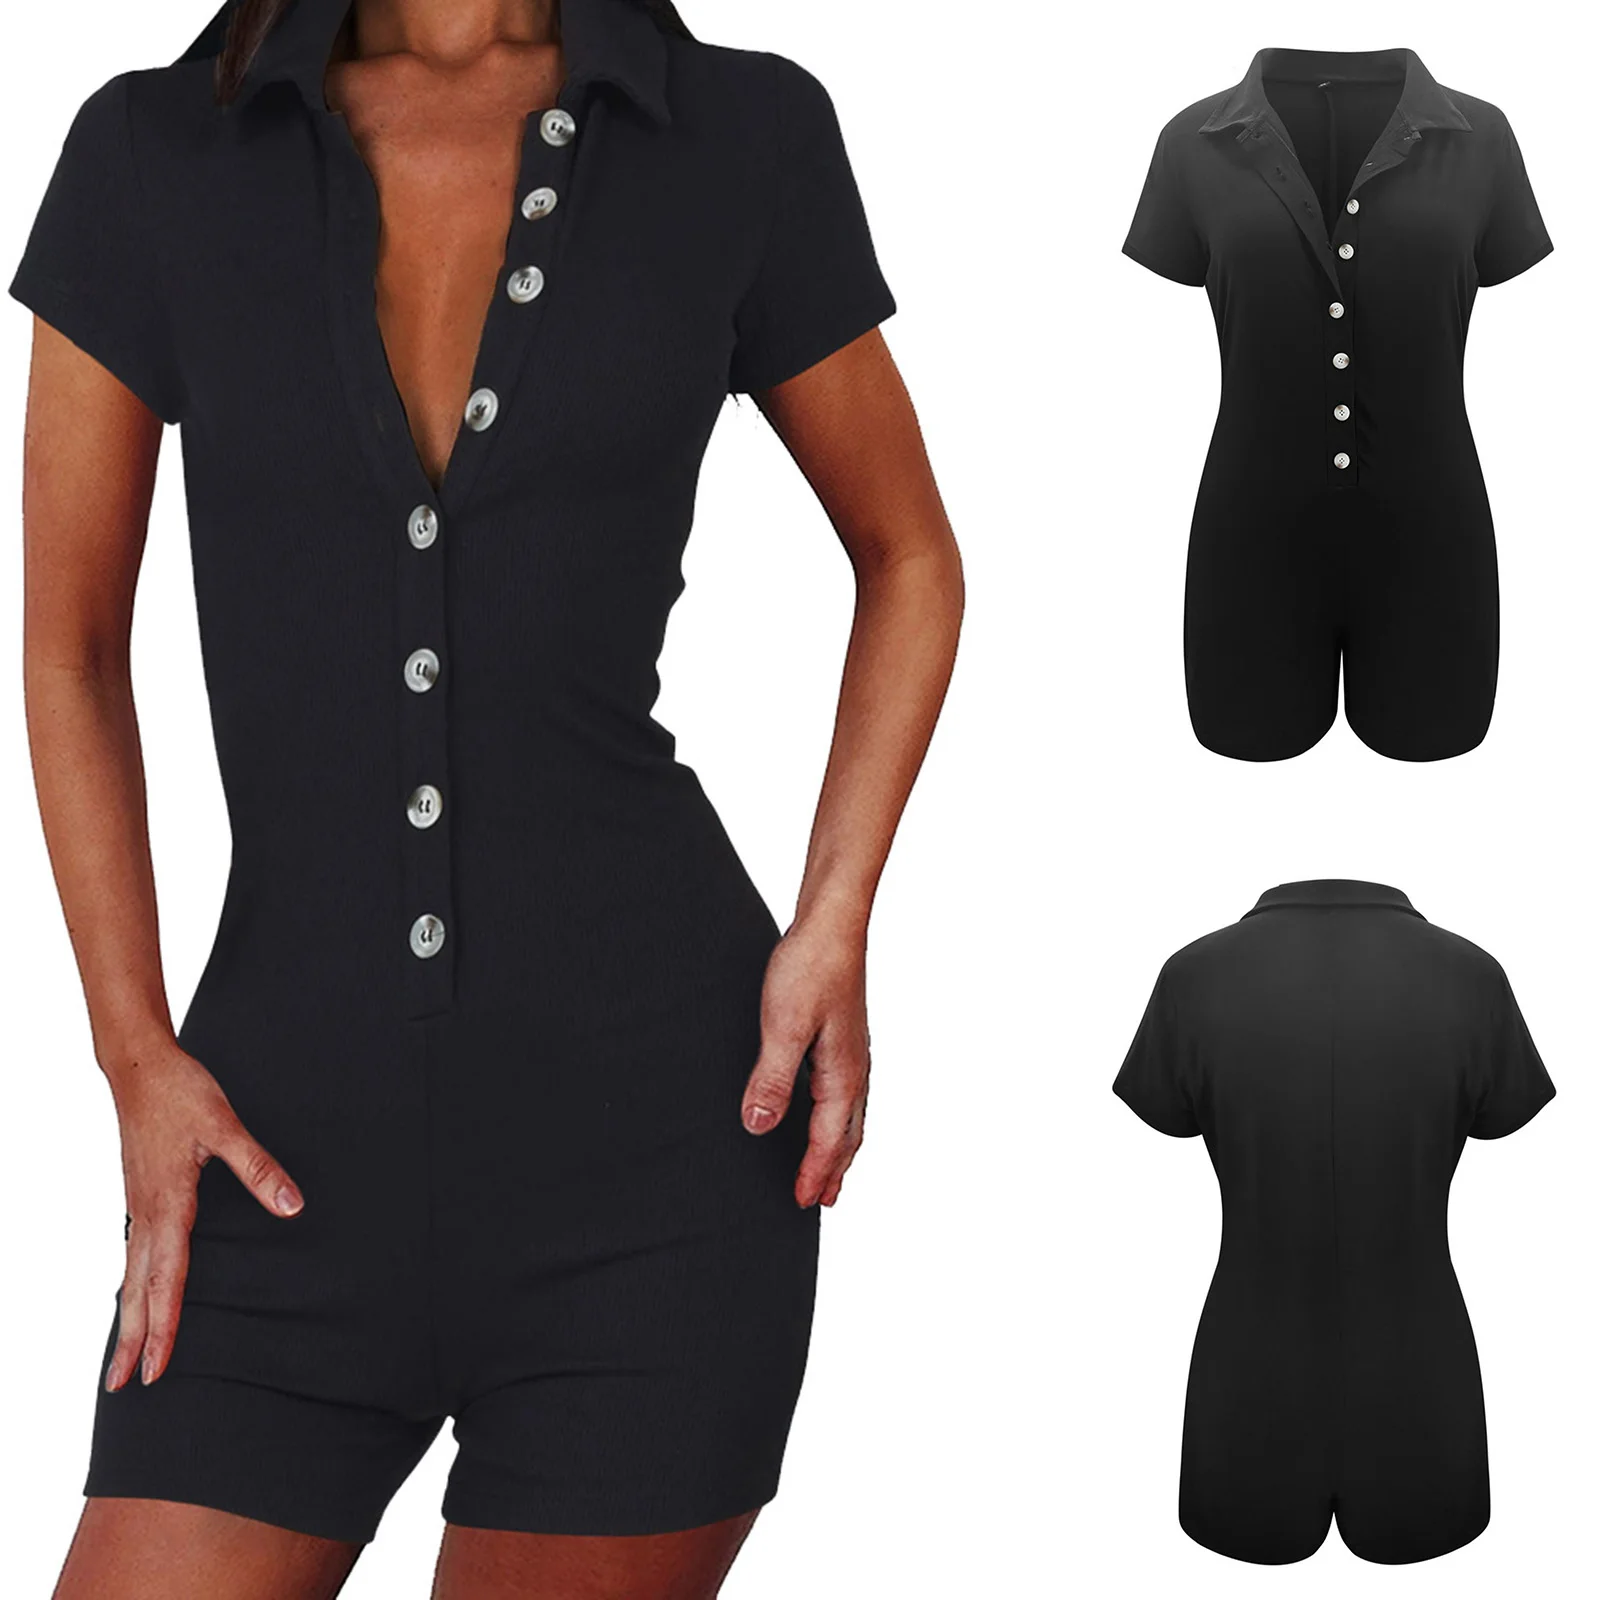 

Women's One-piece Suit, Turn-Down Collar Short Sleeve Button Playsuit for Party Vacation Dating Travelling